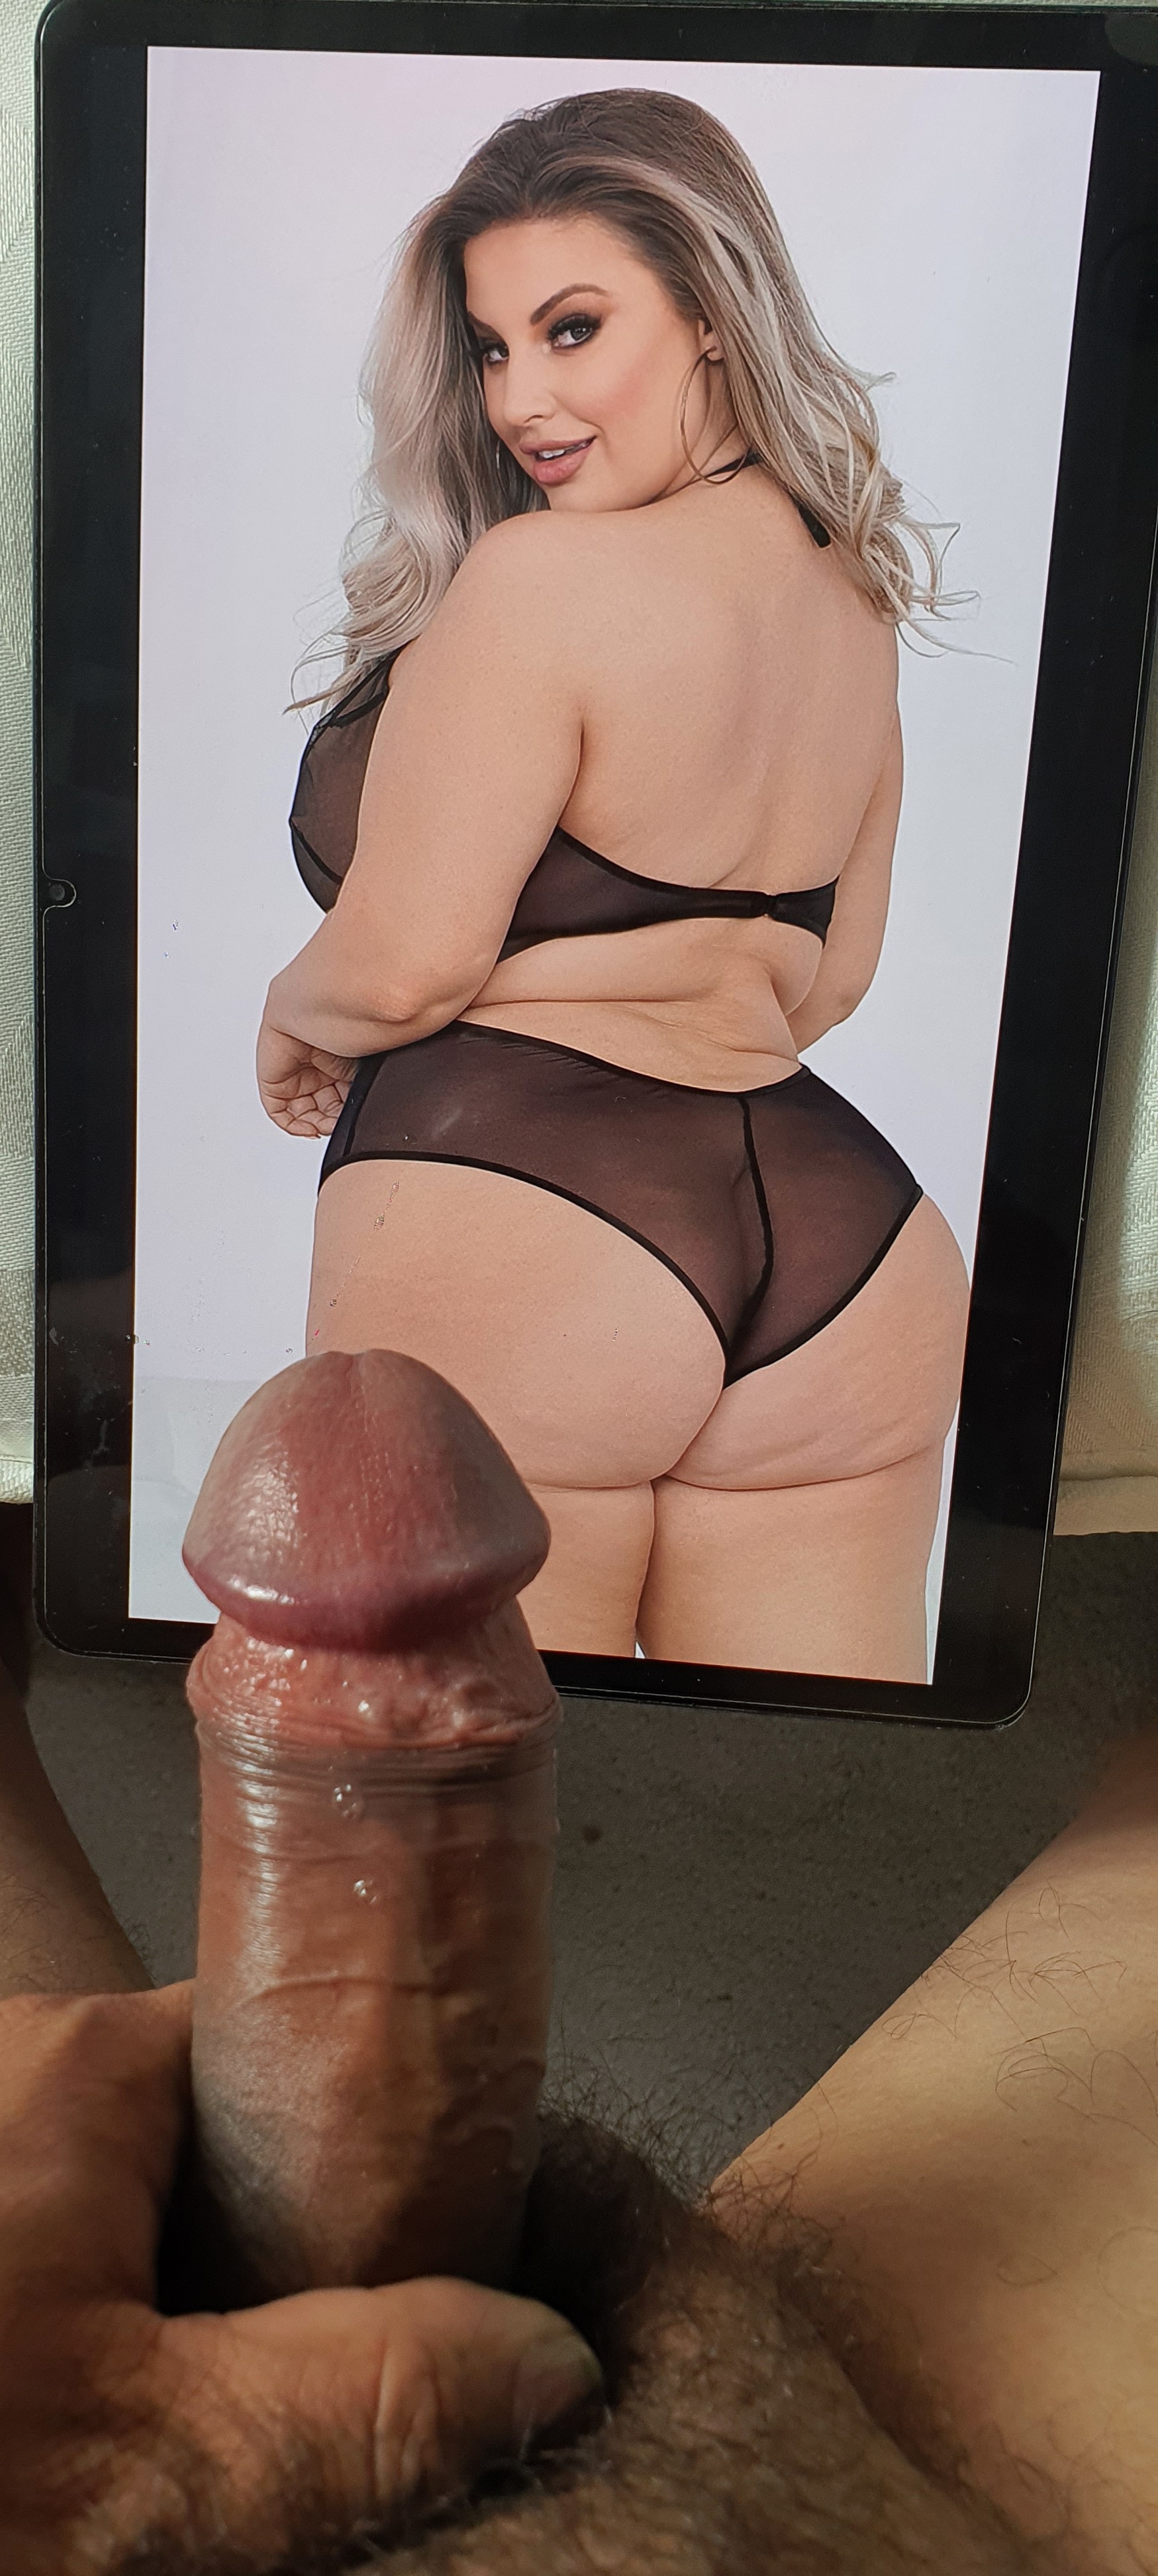 Cock tribute to curvy milf by Thukkamj